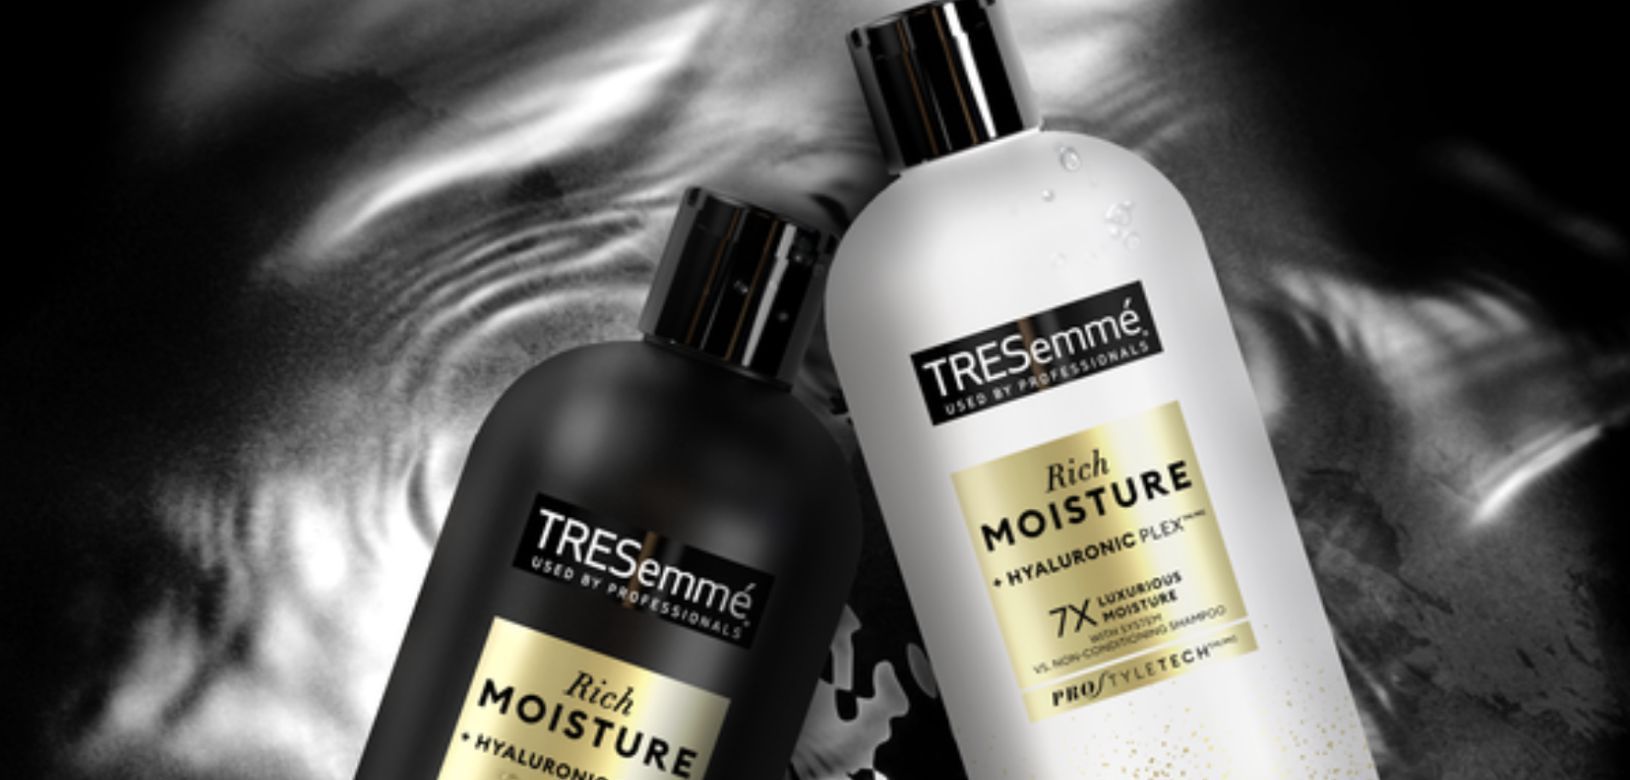 Tresemme Signup